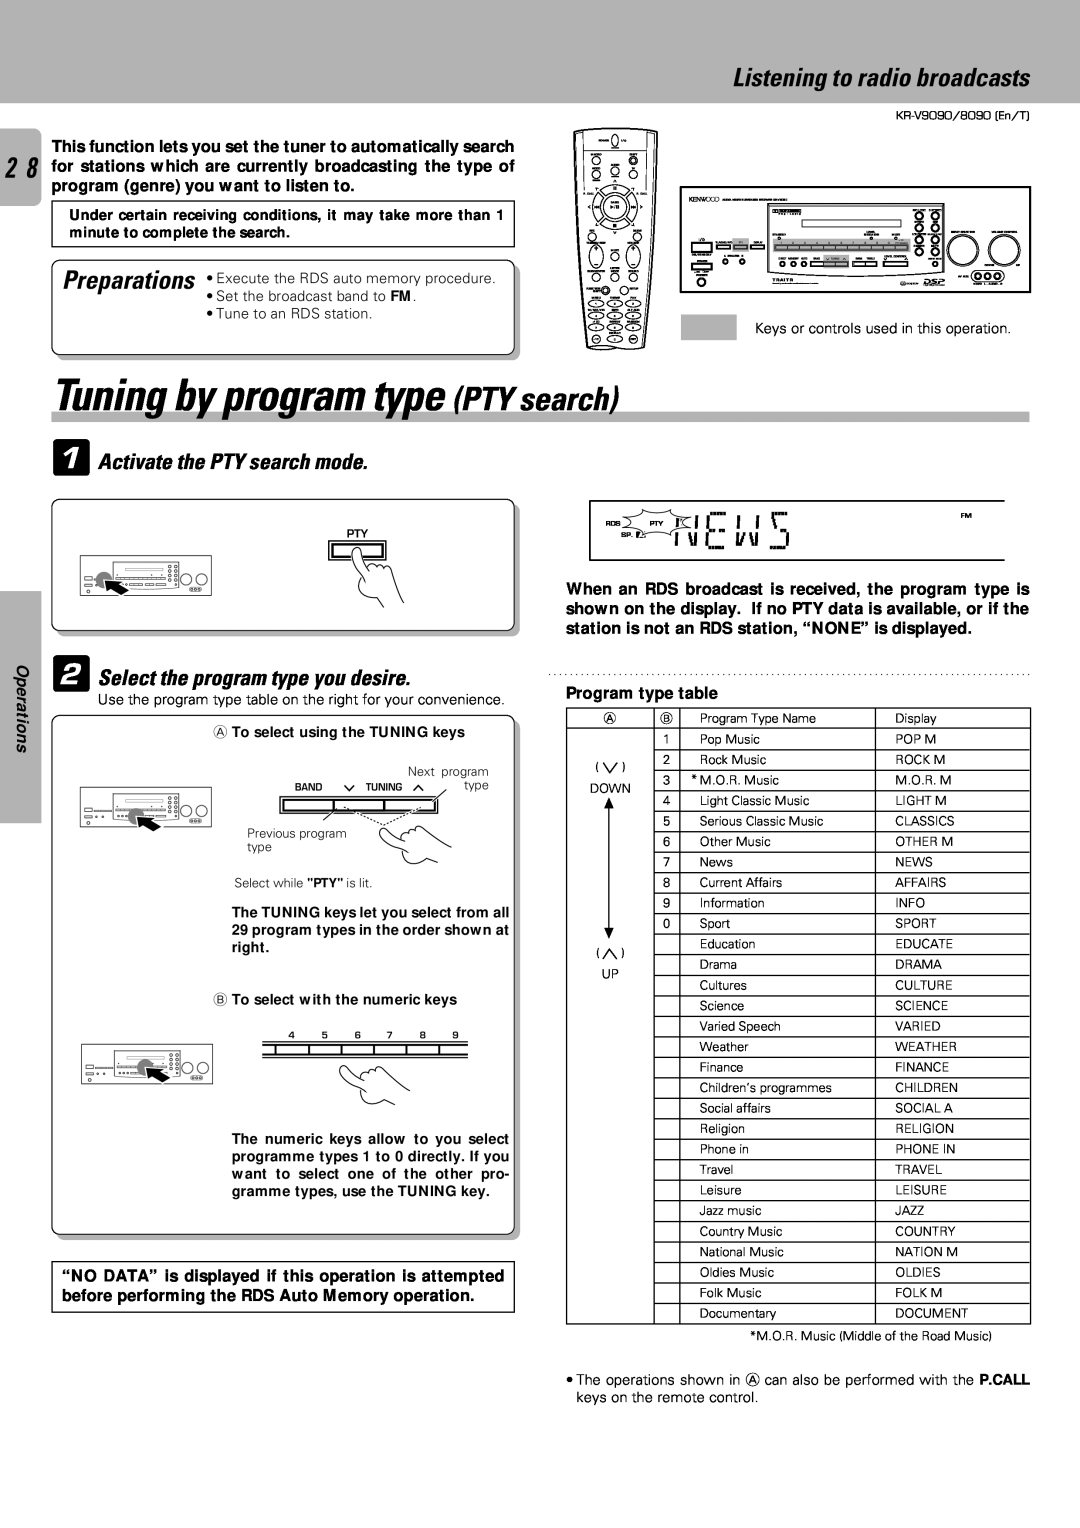 Kenwood KR-V9090, KR-V8090 NEWs, Tuning by program type PTY search, 1Activate the PTY search mode, Preparations 